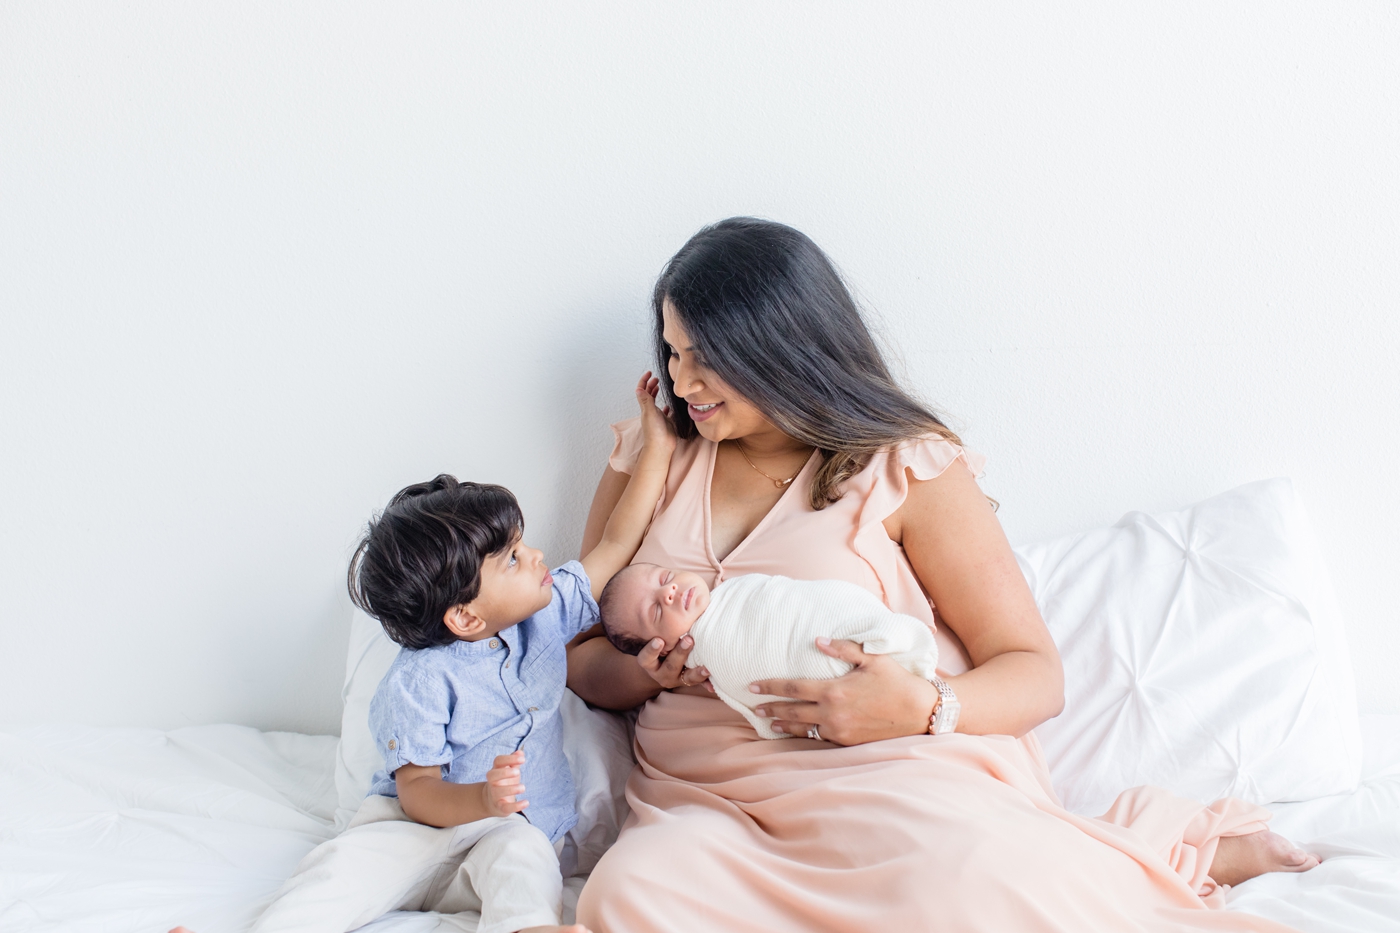 Sweet moment between toddler and Mom looking at each other during newborn session. Photo by Sana Ahmed Photography.